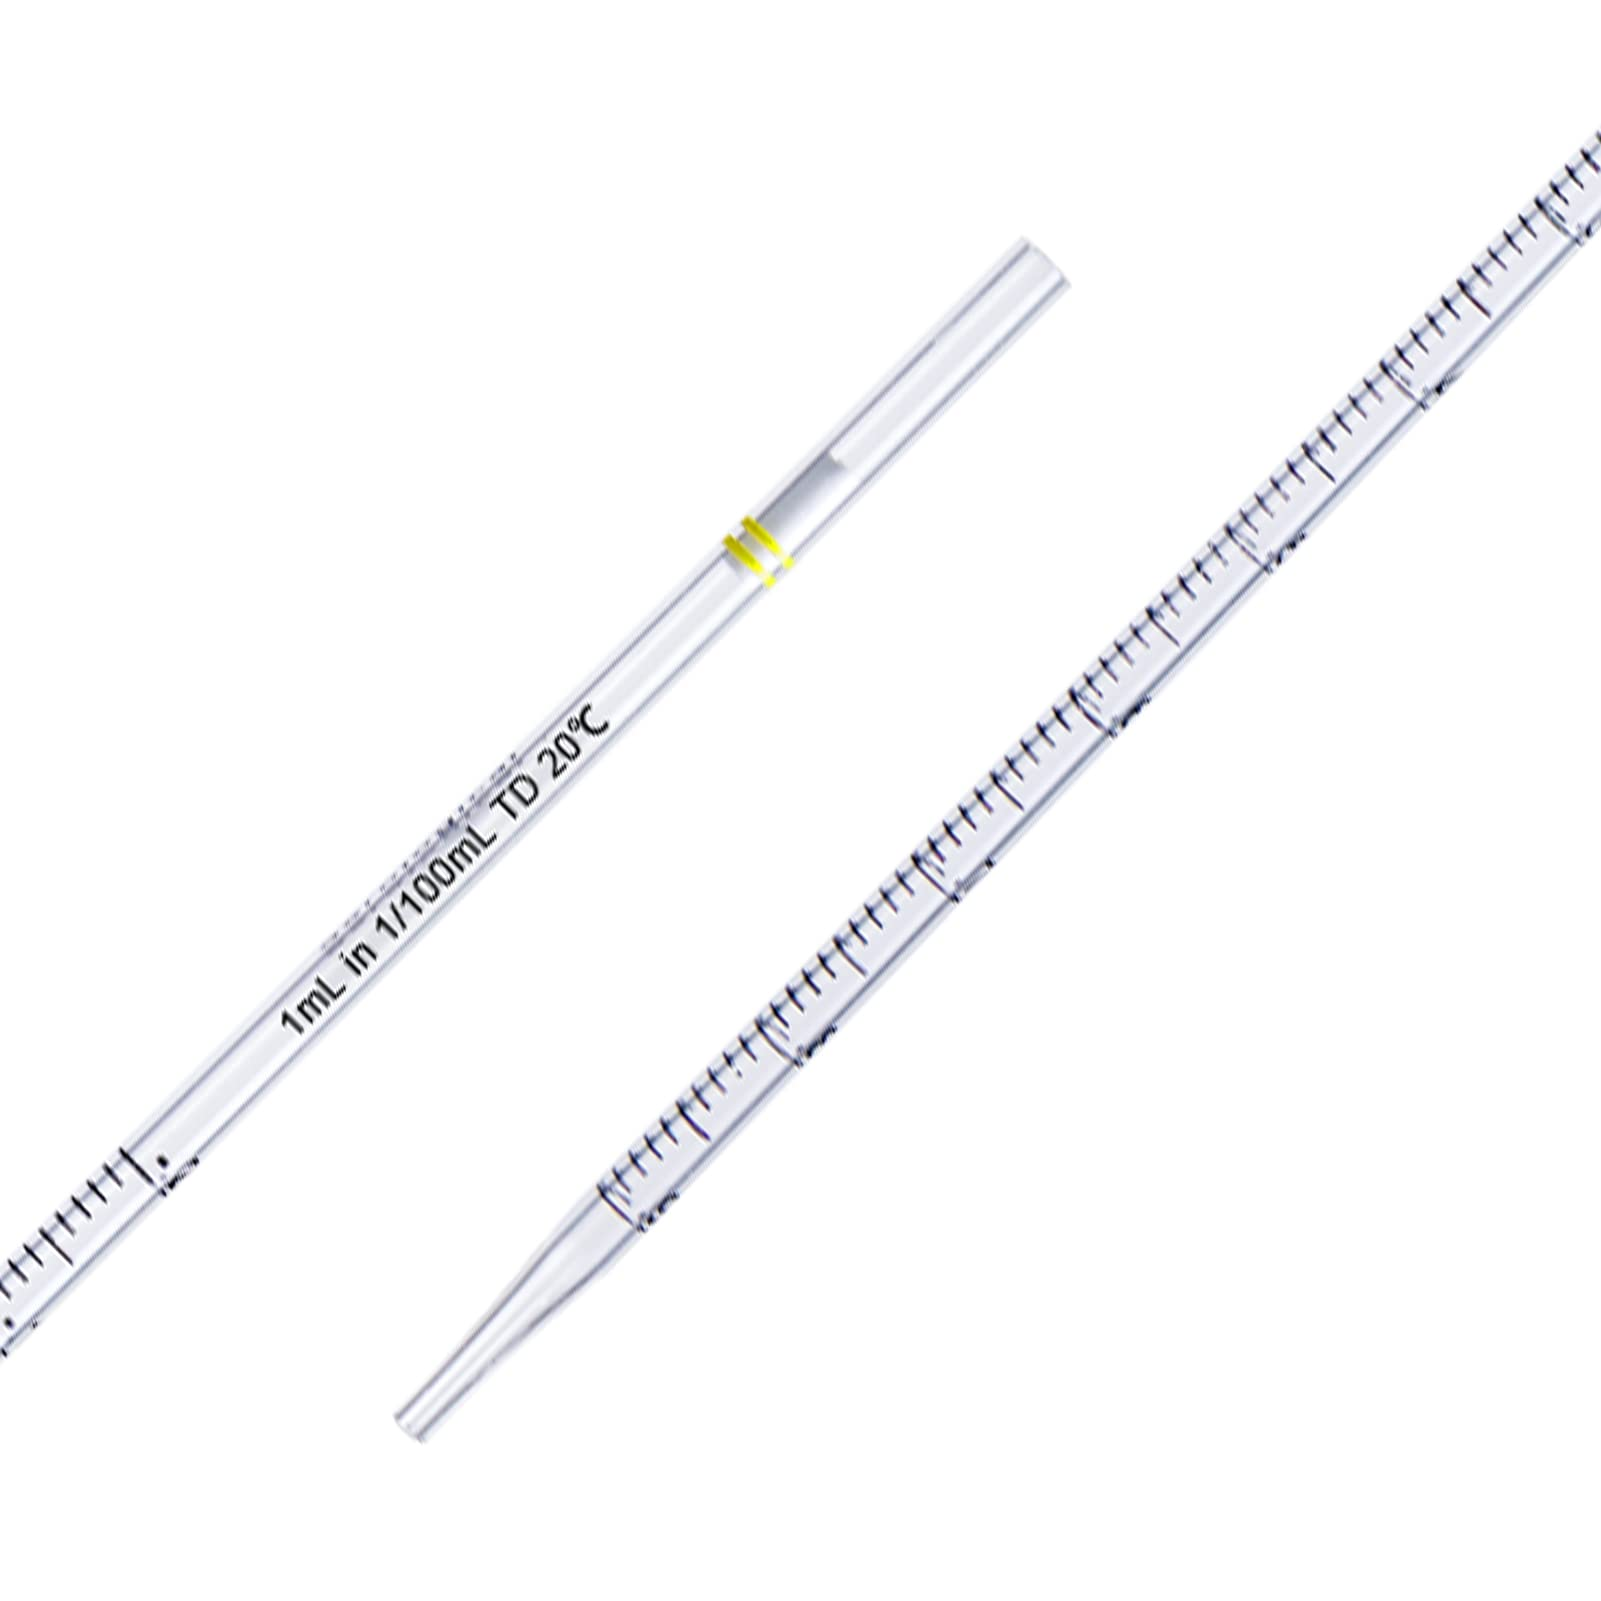 Illustration comparing disposable polystyrene and reusable glass serological pipettes